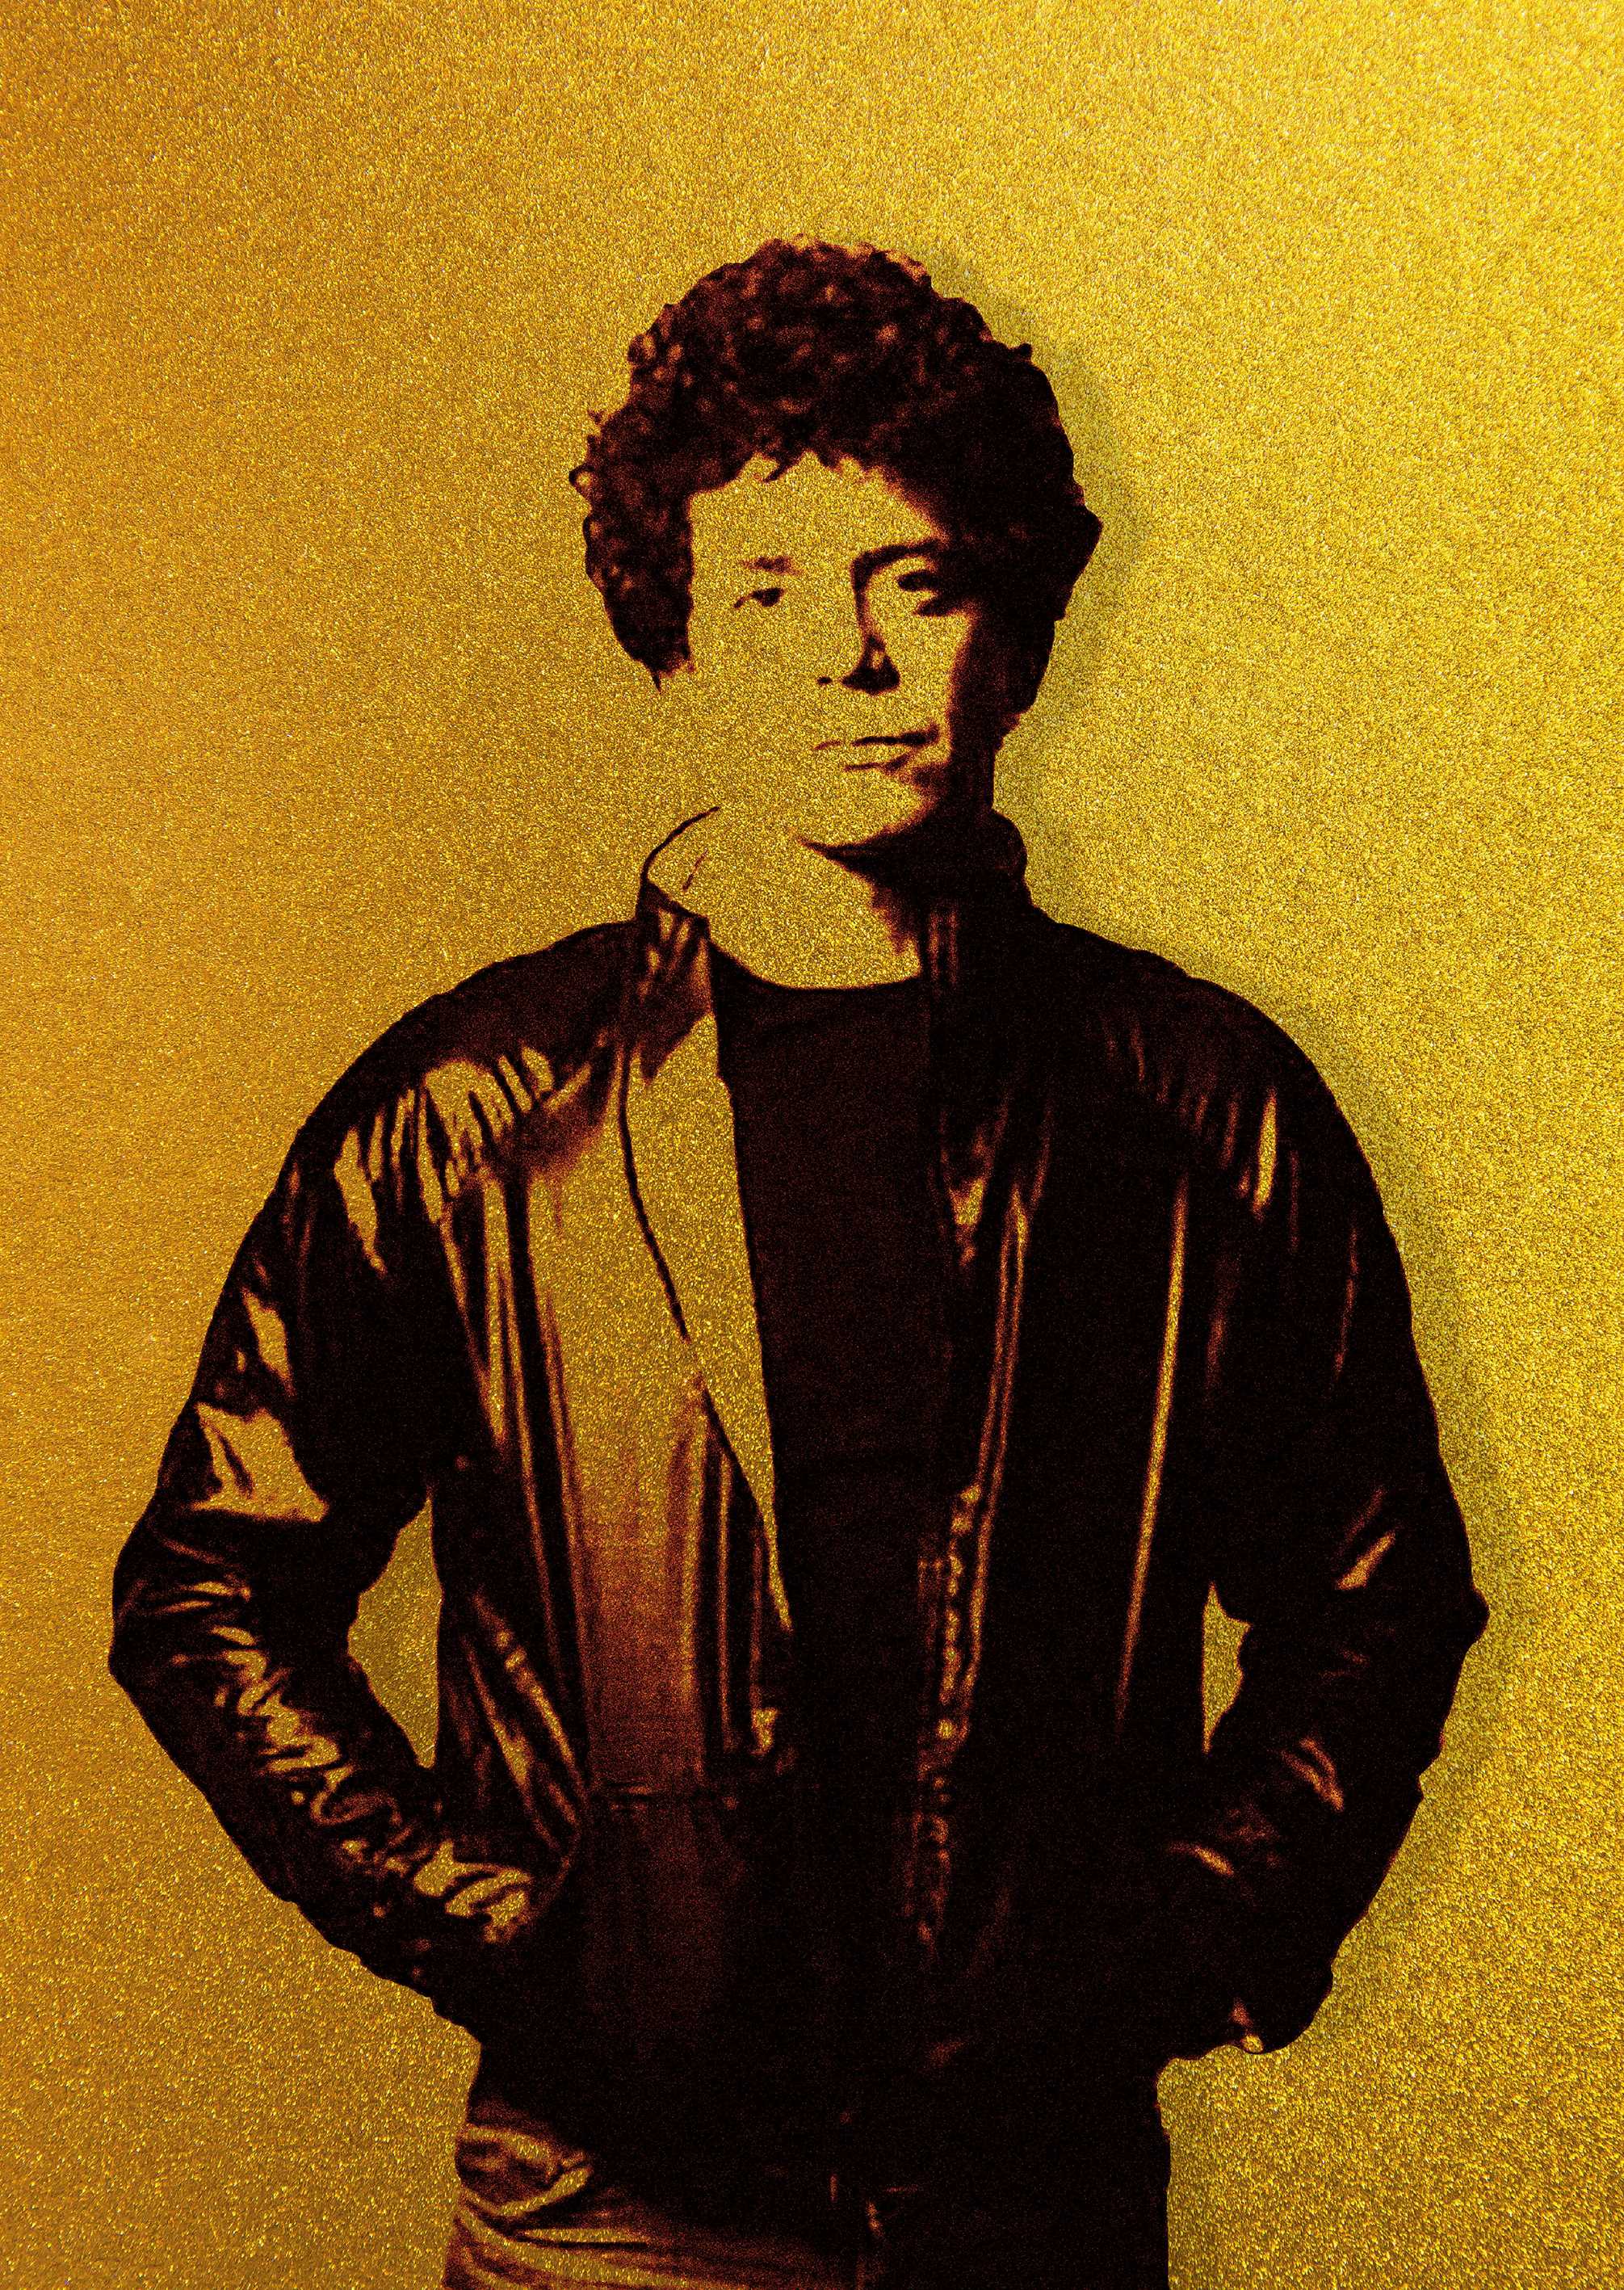 Pass Thru Fire - The Music of Lou Reed